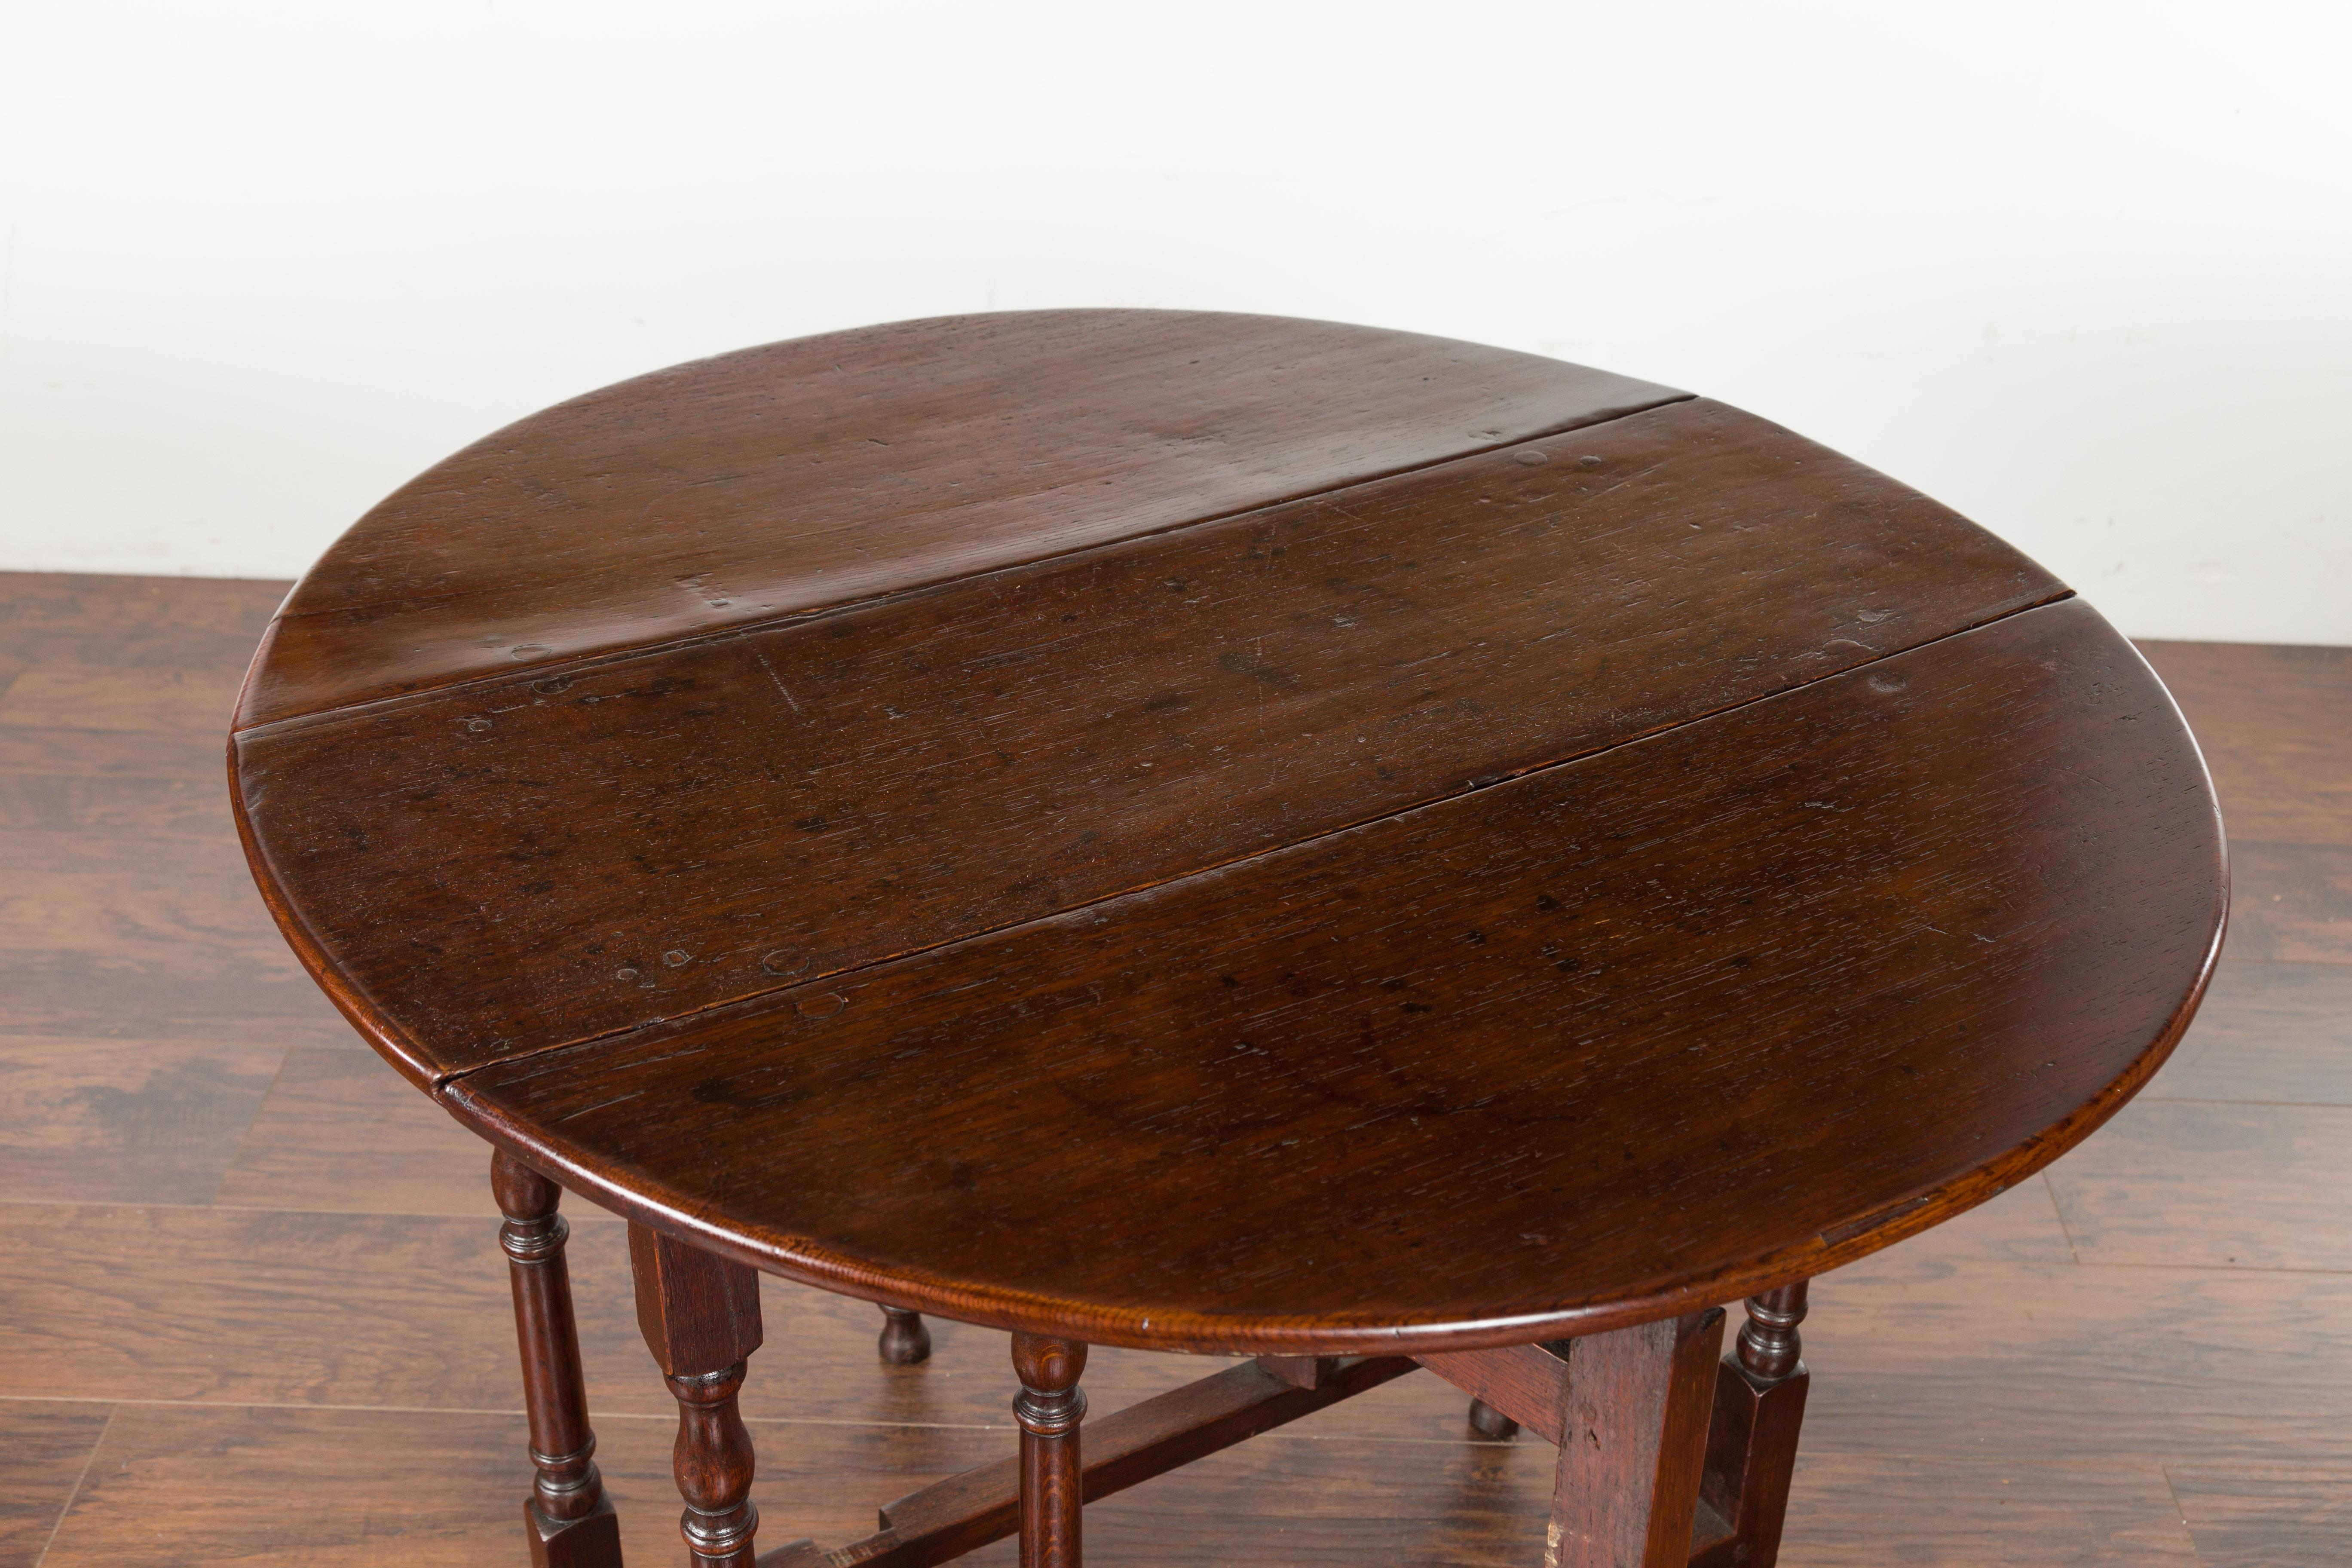 Petite English Oval Oak 19th Century Drop-Leaf Table with Baluster Legs For Sale 5